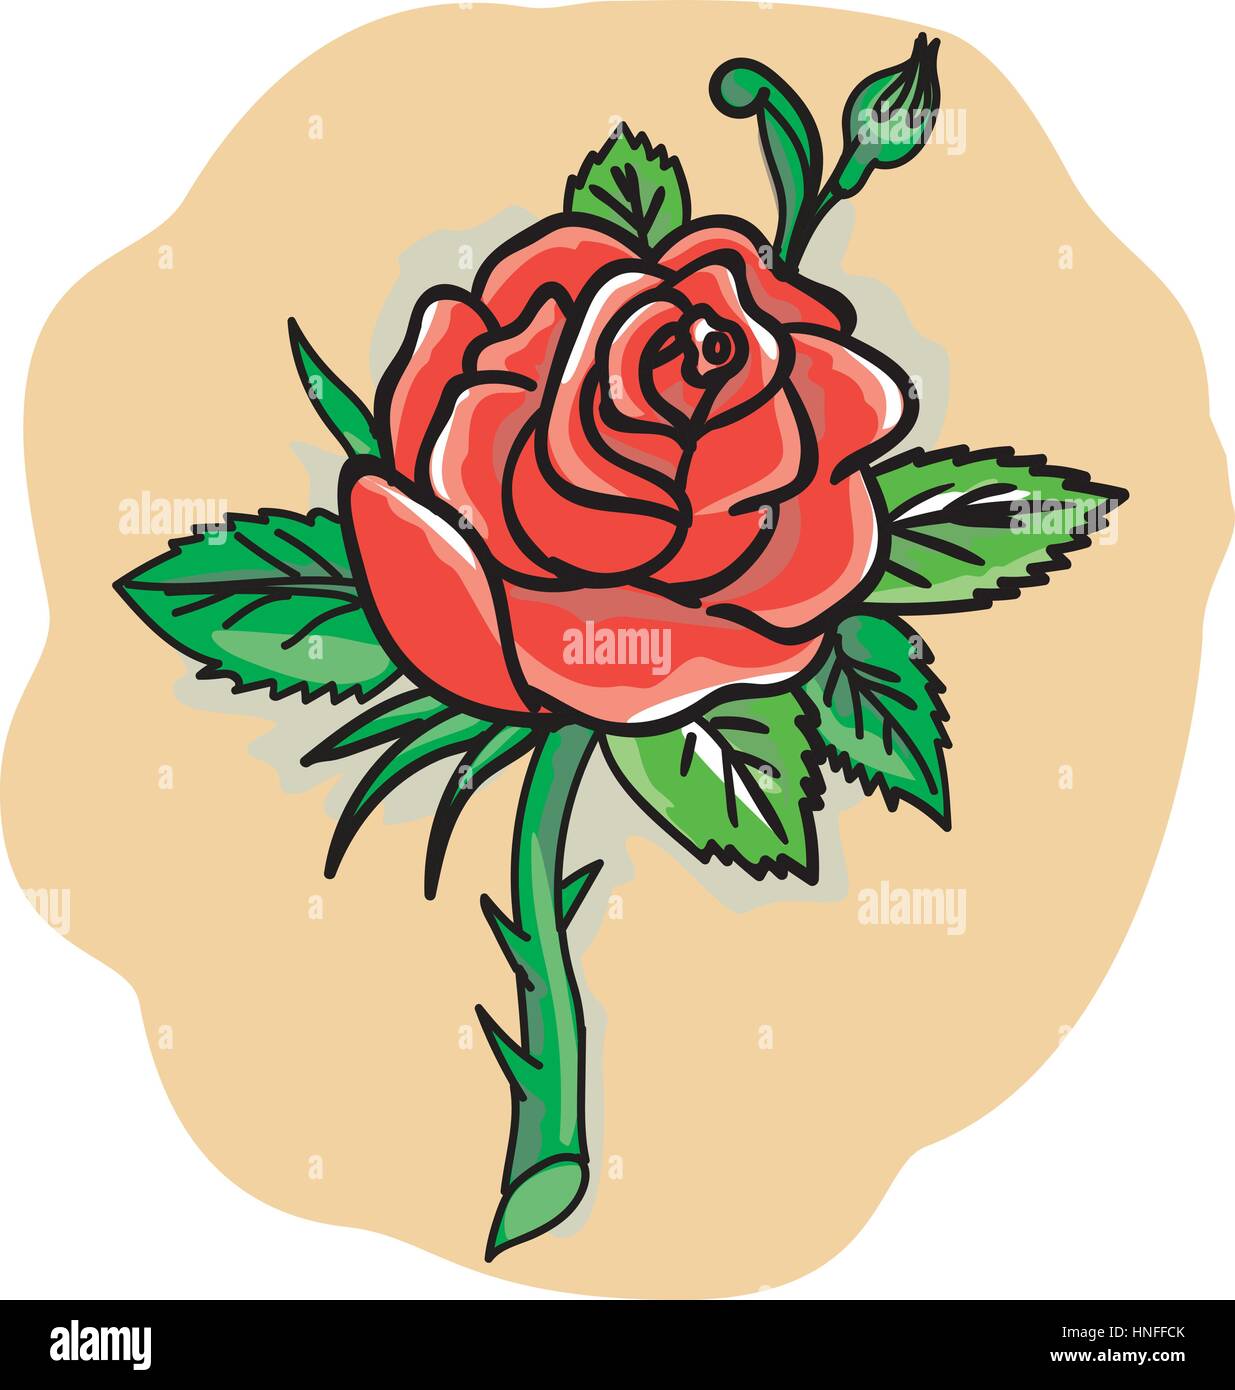 Tattoo style illustration of a red rose bud with leaves on a stem with thorns set on isolated white background. Stock Vector